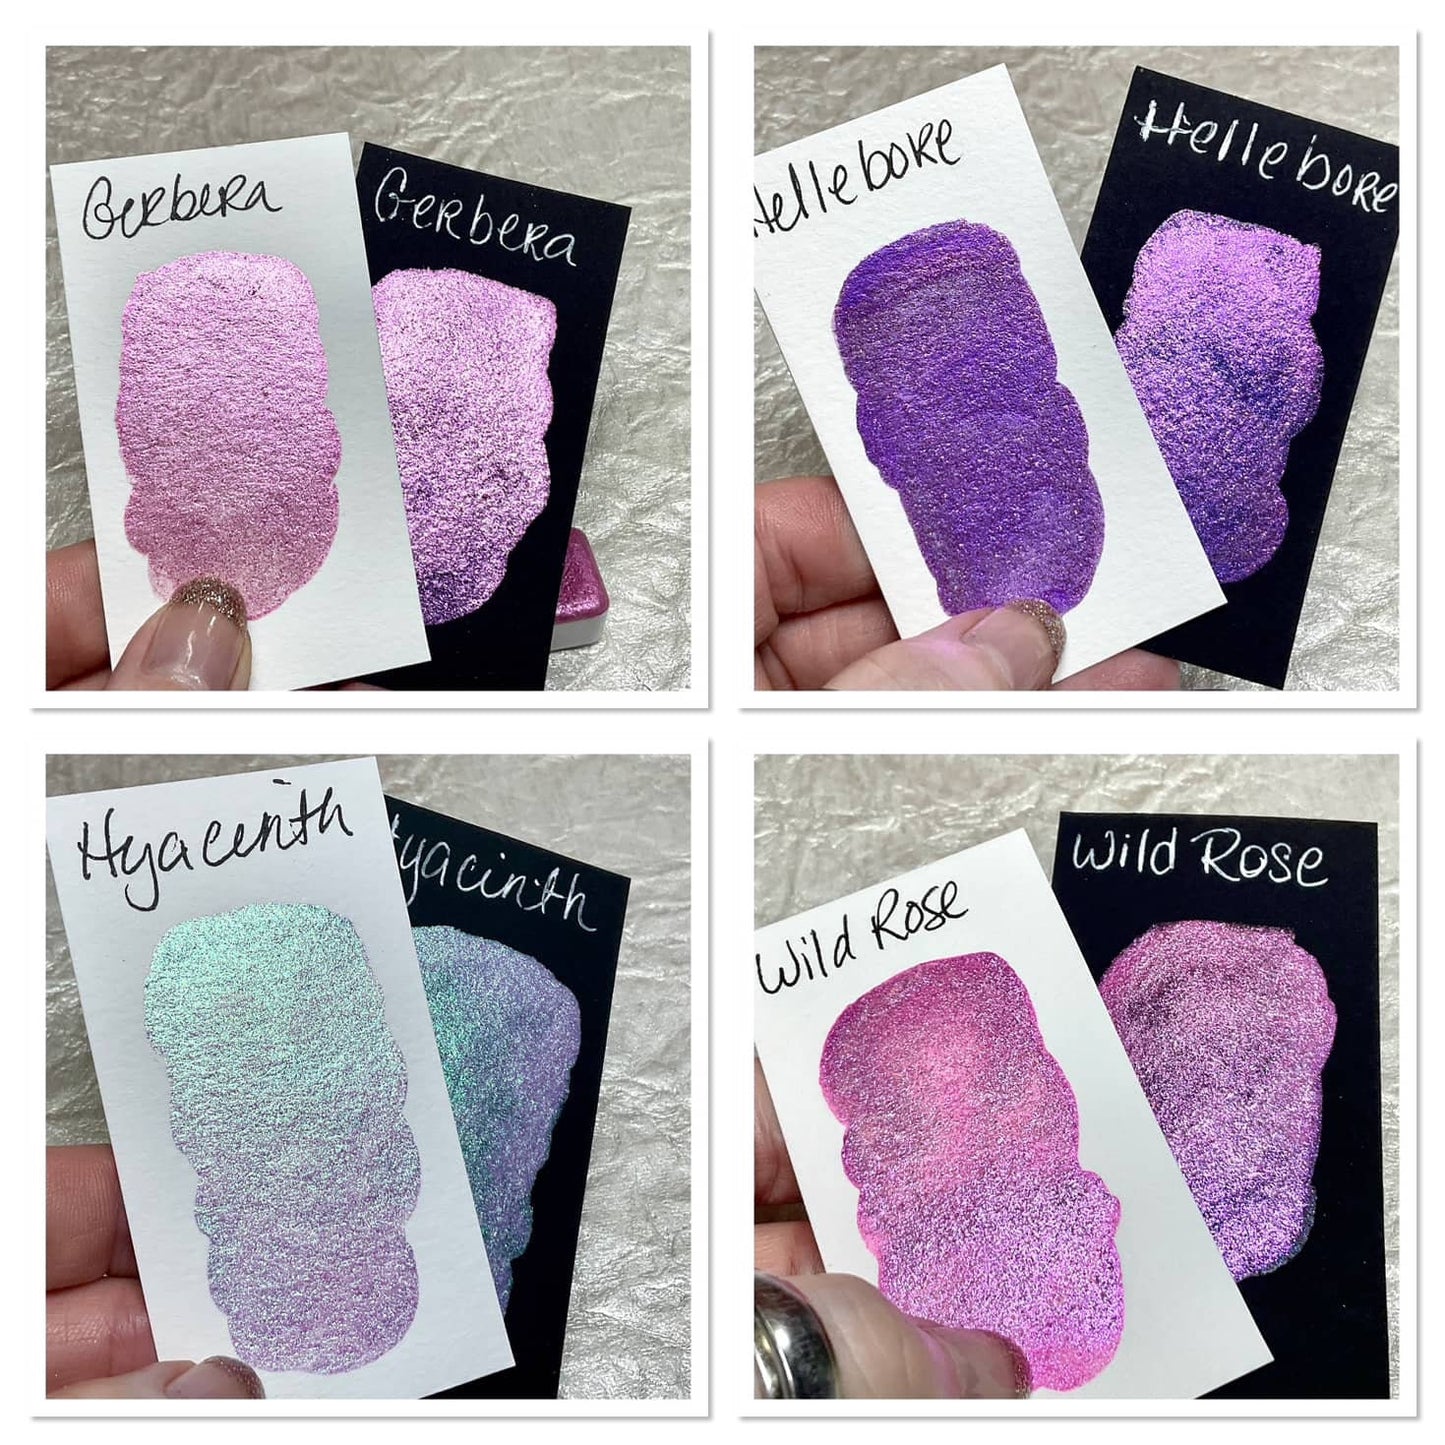 Botanical Whimsy shimmer watercolor paint swatch photo